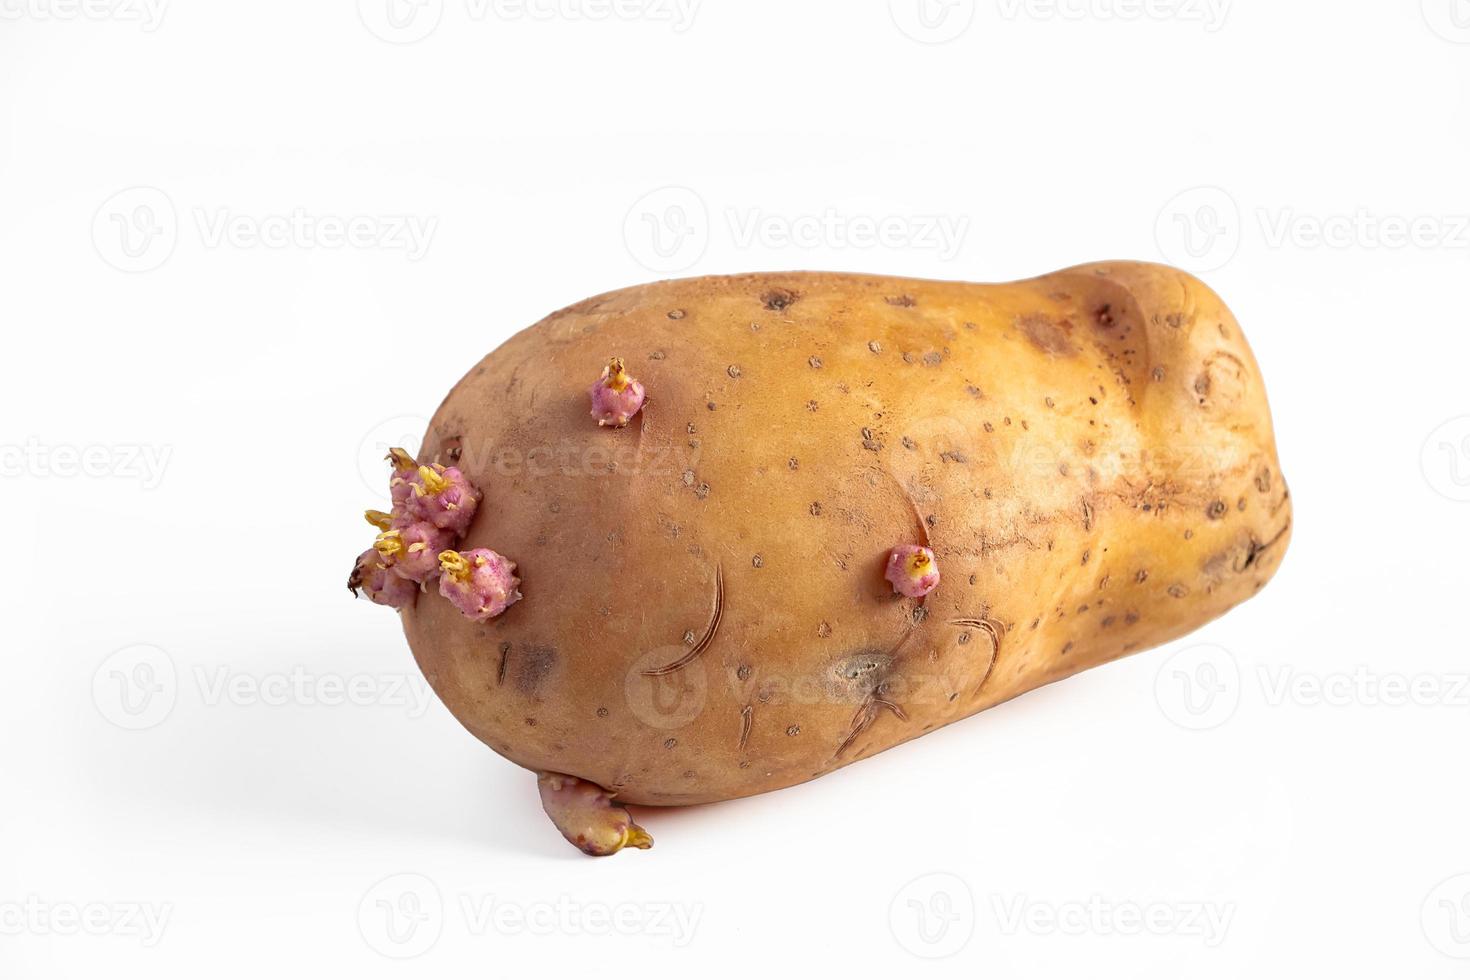 Sprouts on potato tubers. Sprouted potatoes on white background. photo